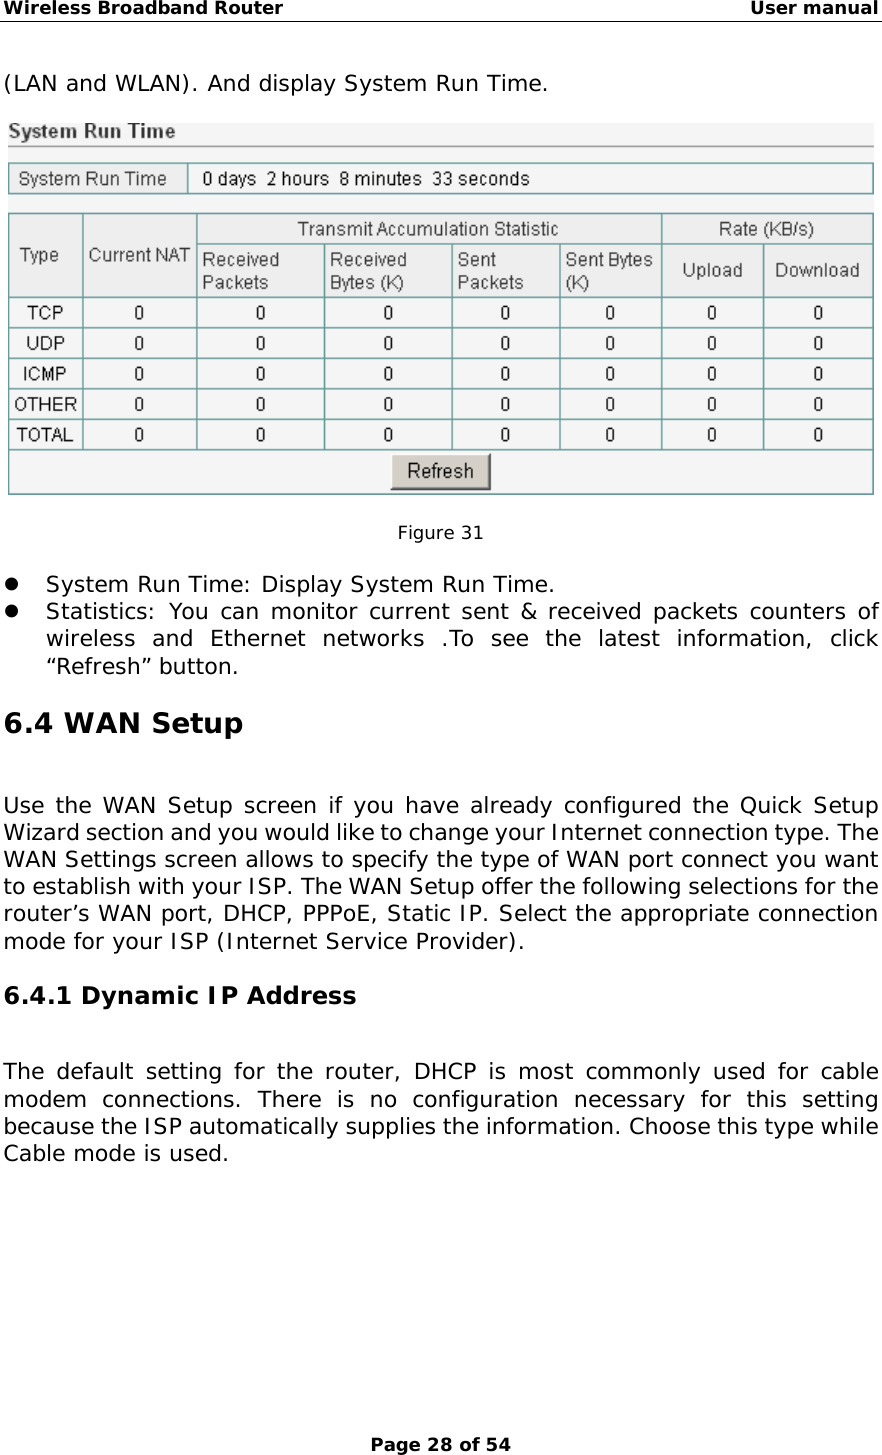 Wireless Broadband Router                                                   User manual Page 28 of 54 (LAN and WLAN). And display System Run Time.    Figure 31  z System Run Time: Display System Run Time. z Statistics: You can monitor current sent &amp; received packets counters of wireless and Ethernet networks .To see the latest information, click “Refresh” button. 6.4 WAN Setup  Use the WAN Setup screen if you have already configured the Quick Setup Wizard section and you would like to change your Internet connection type. The WAN Settings screen allows to specify the type of WAN port connect you want to establish with your ISP. The WAN Setup offer the following selections for the router’s WAN port, DHCP, PPPoE, Static IP. Select the appropriate connection mode for your ISP (Internet Service Provider). 6.4.1 Dynamic IP Address The default setting for the router, DHCP is most commonly used for cable modem connections. There is no configuration necessary for this setting because the ISP automatically supplies the information. Choose this type while Cable mode is used.   